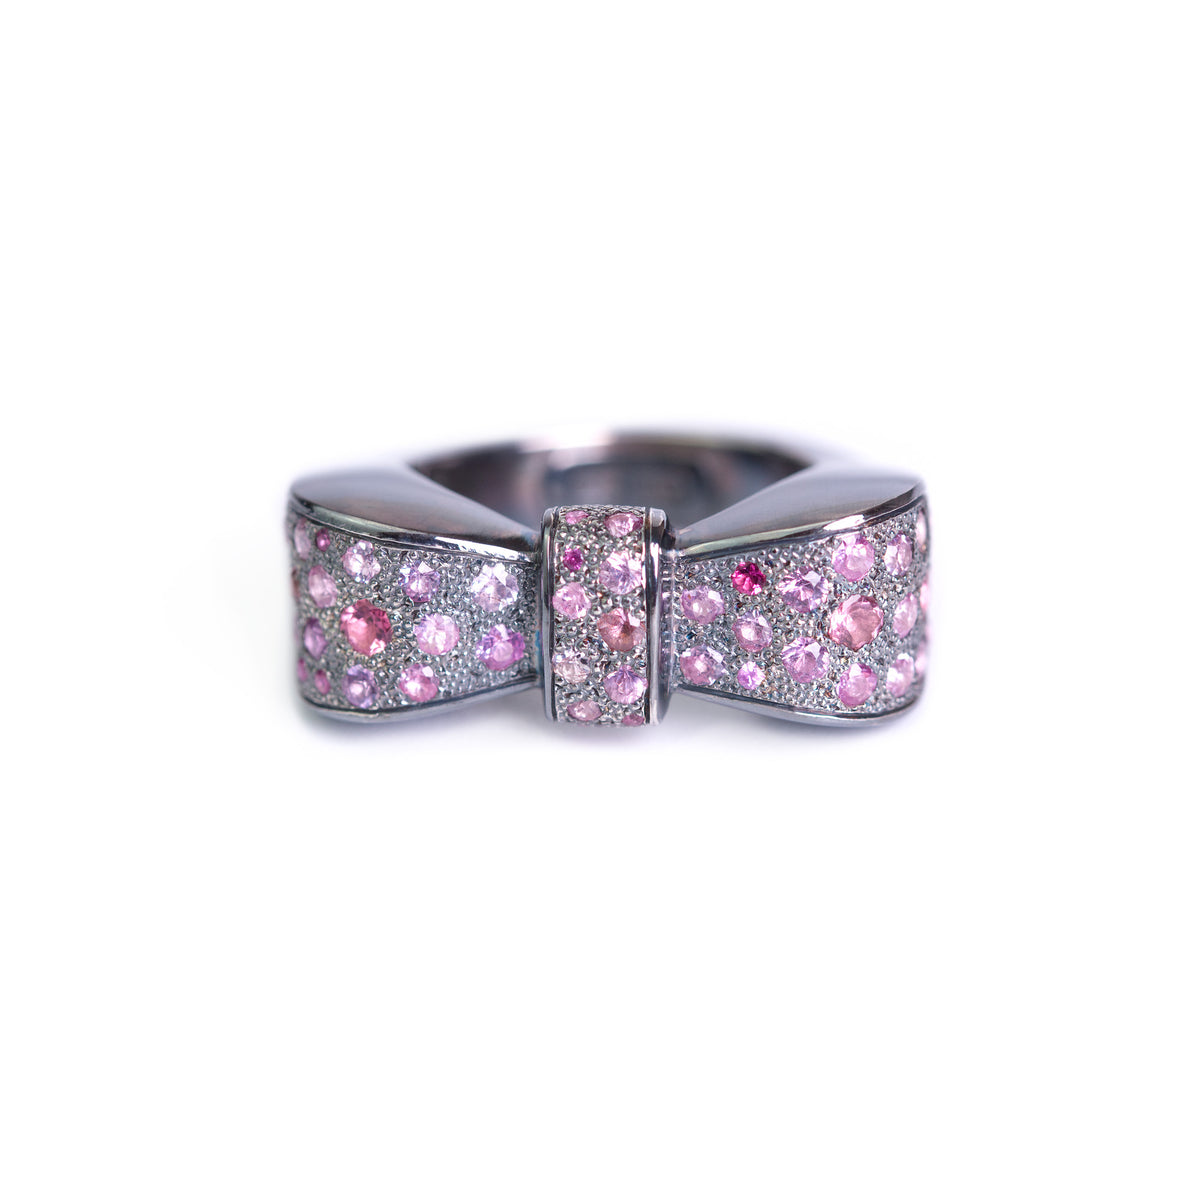 Art Deco Bow Ring with pink sapphires made by Ewa Z. Sleziona Jewellery